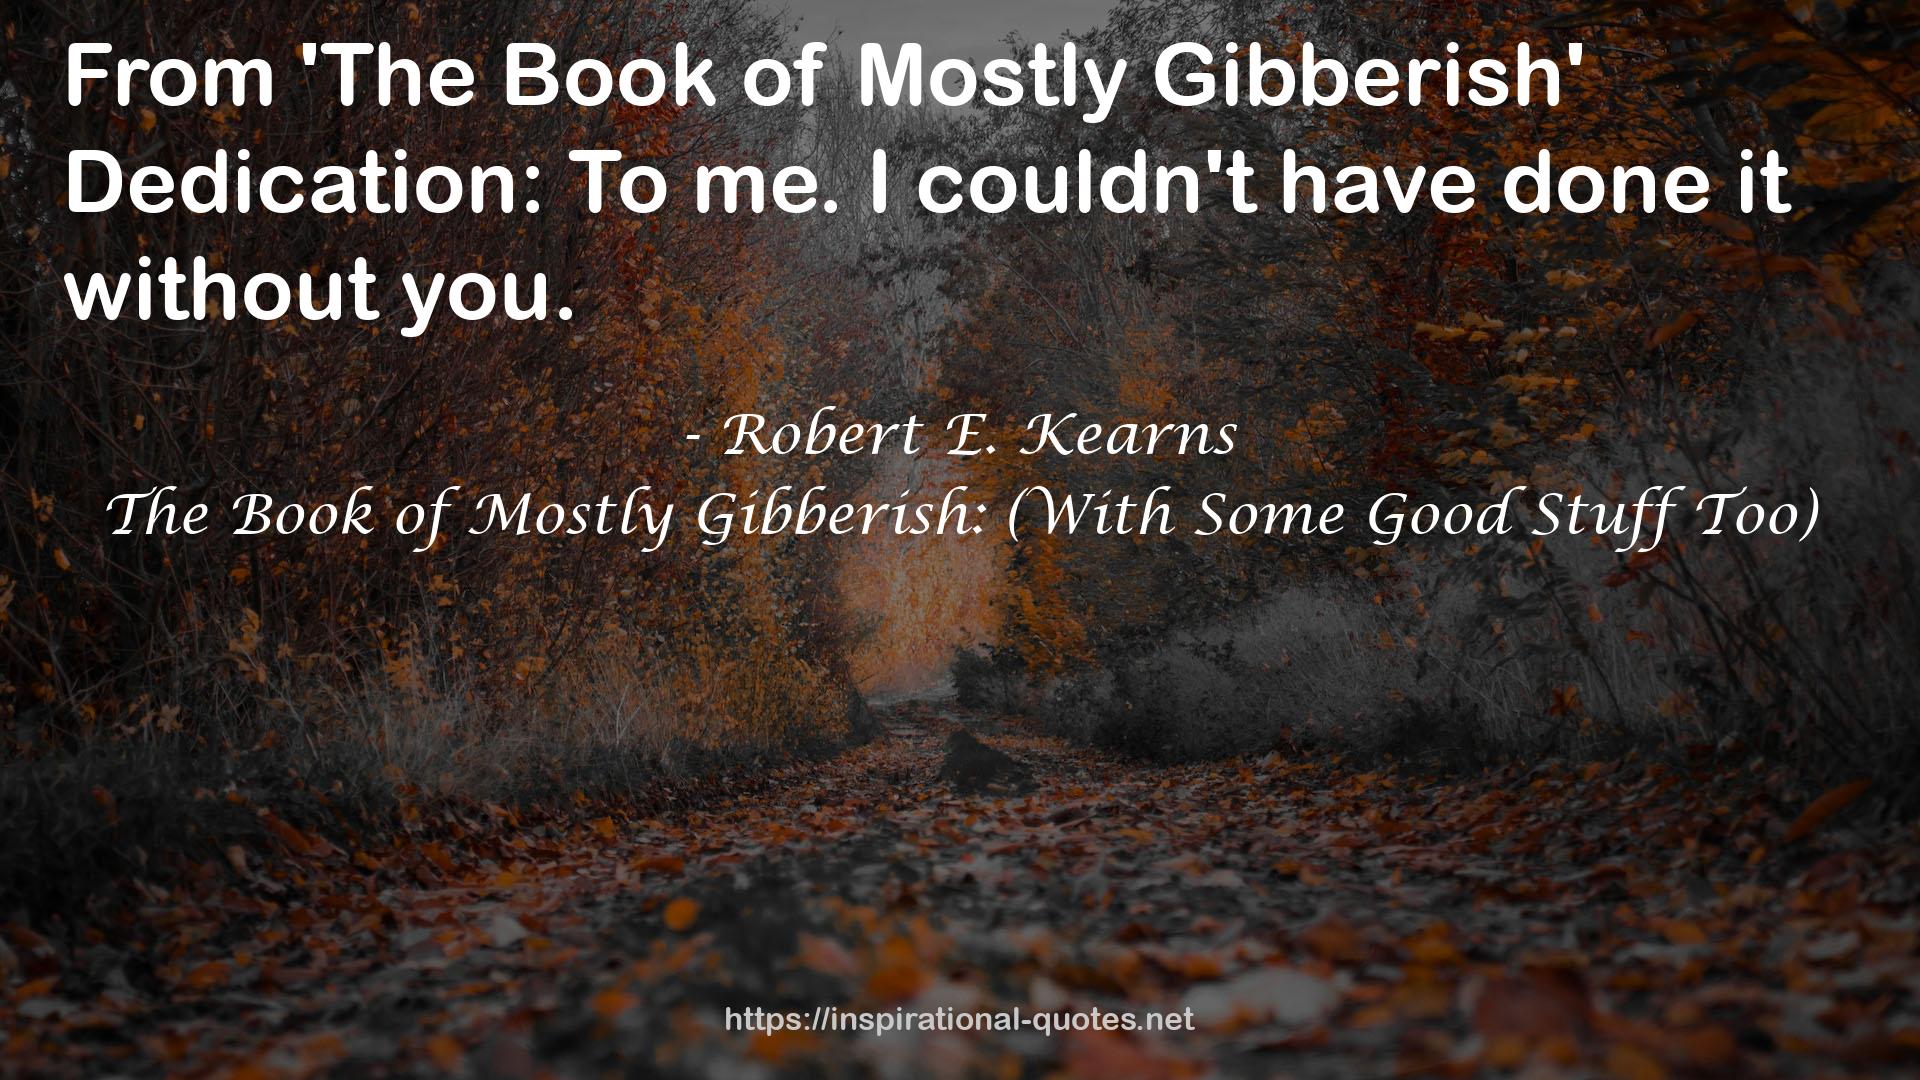 The Book of Mostly Gibberish: (With Some Good Stuff Too) QUOTES